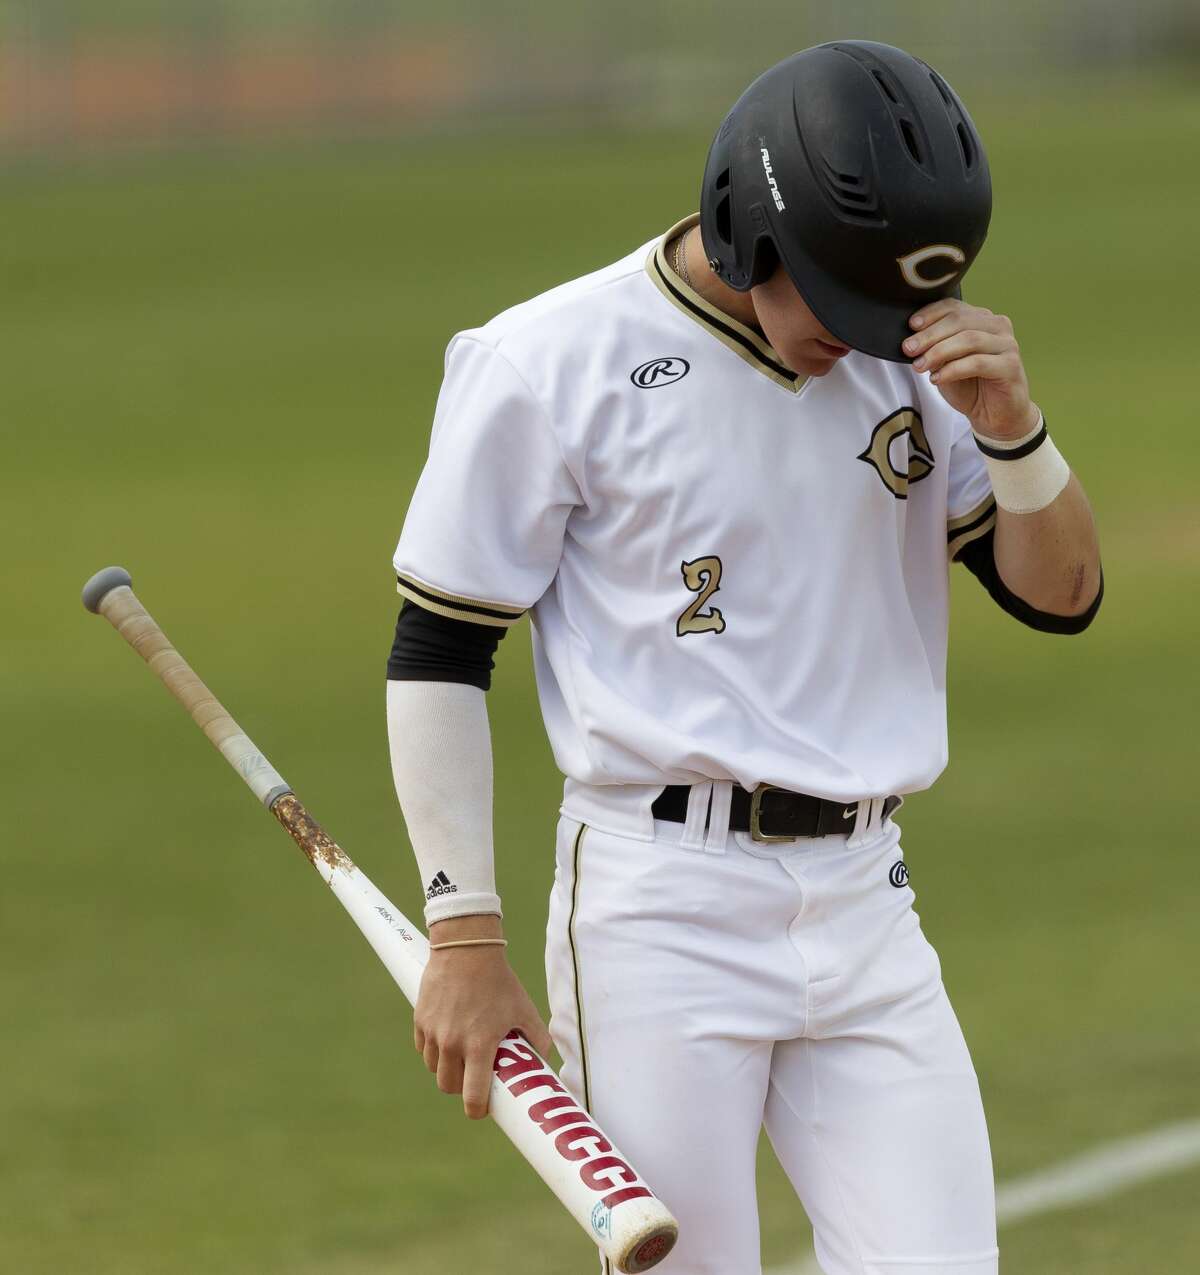 Tyler Linneweber #2 of Conroe reacts after striking out in the first inning of a game during the Klein Tomball Tournament, Saturday, March 10, 2018, in Tomball.